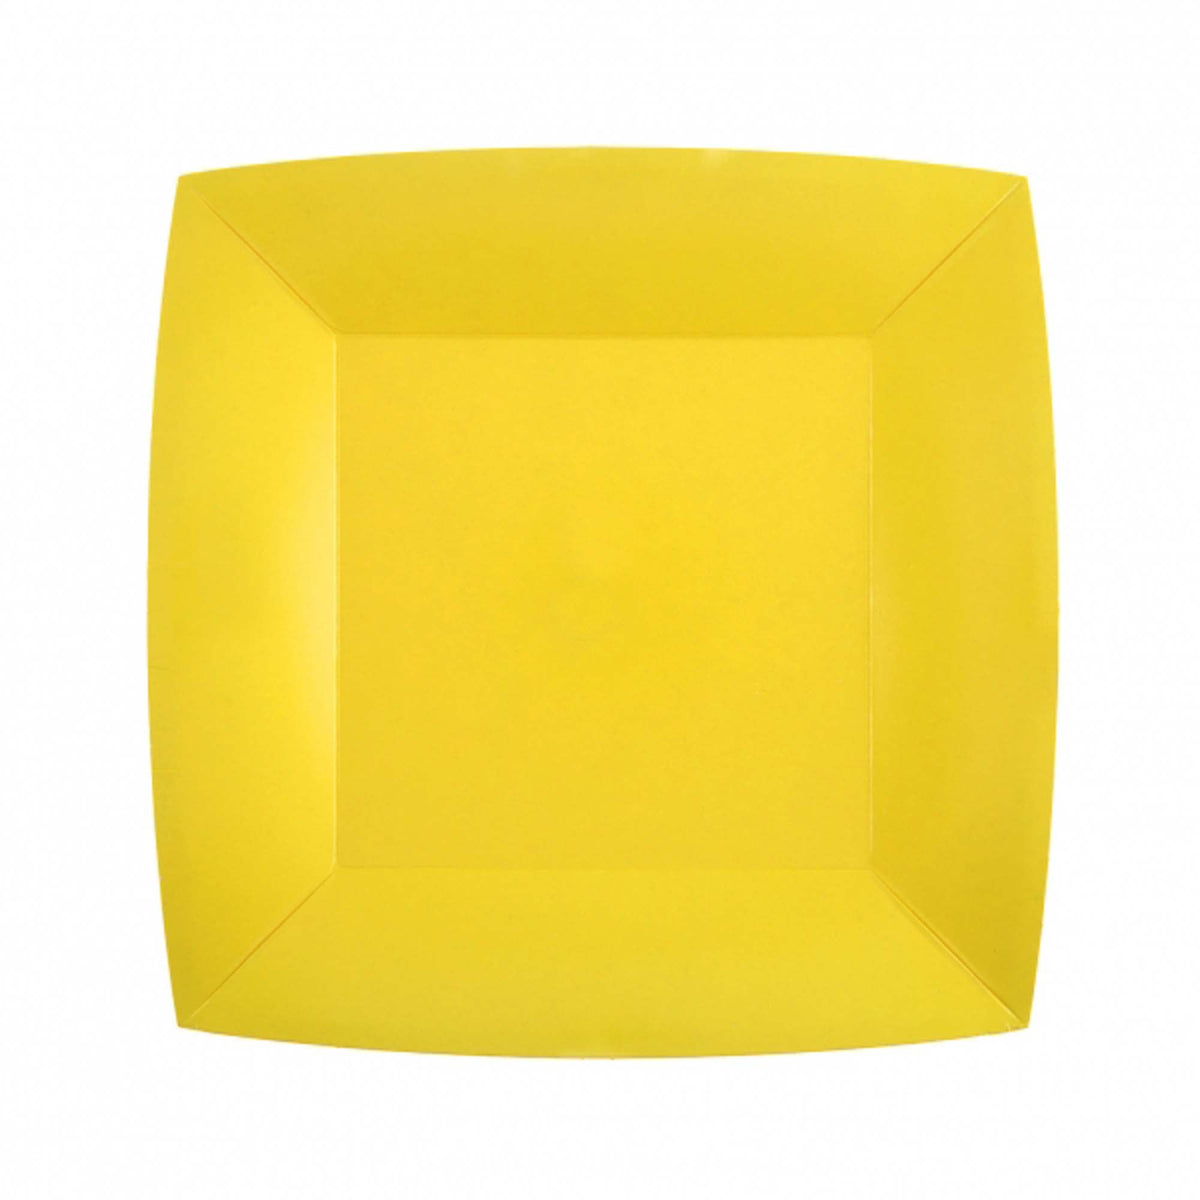 SANTEX Everyday Entertaining Yellow Small Square Dessert Party Paper Plates, 7 Inches, 10 Count 3660380071921